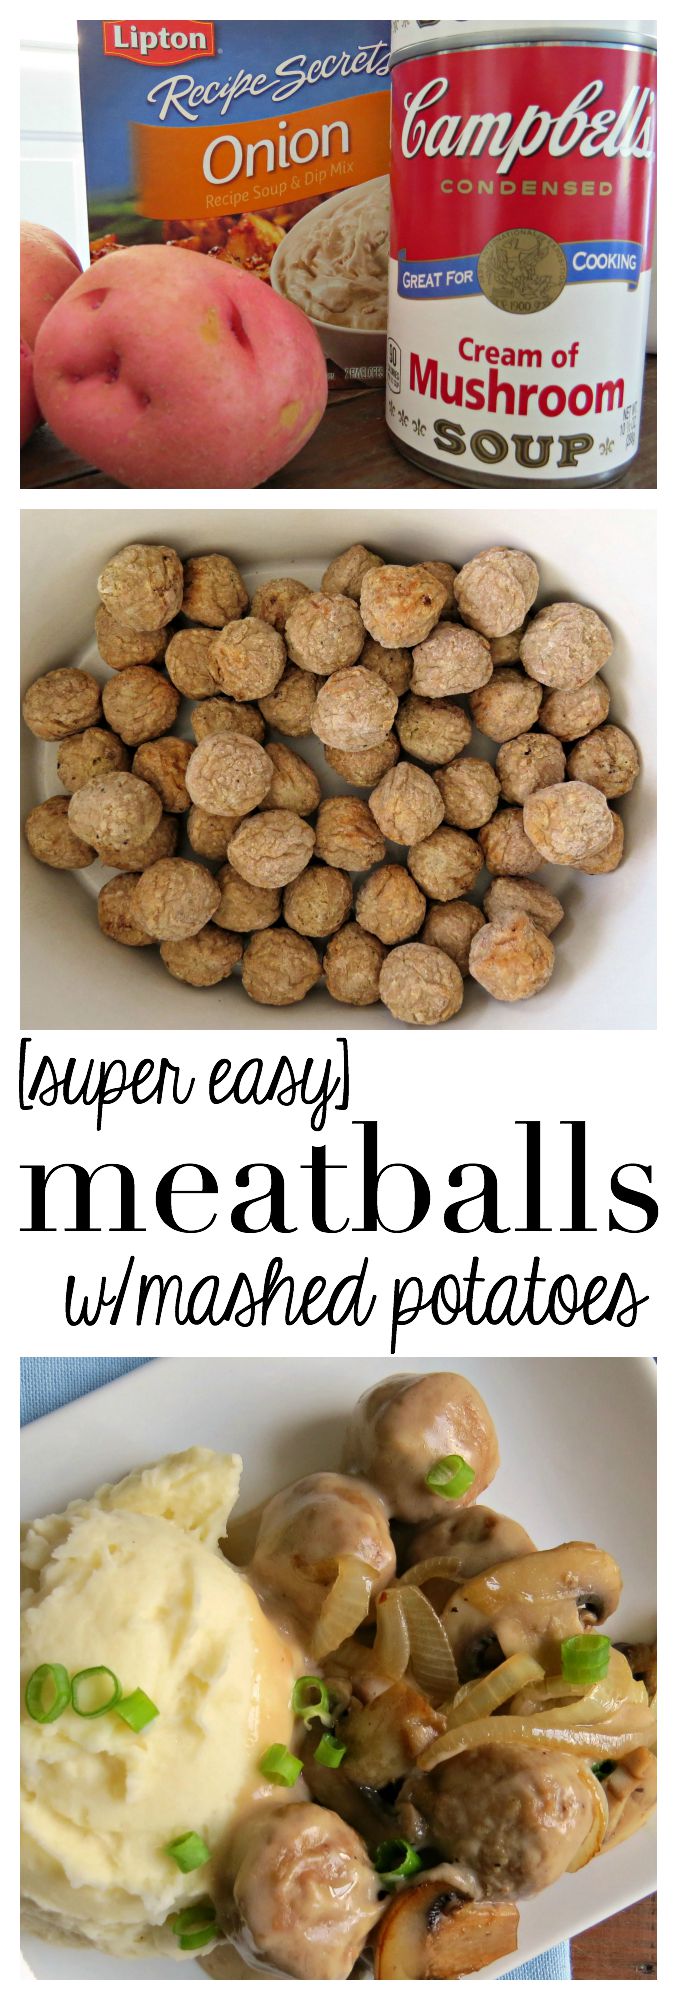 Super Easy Meatballs with Mashed Potatoes recipe